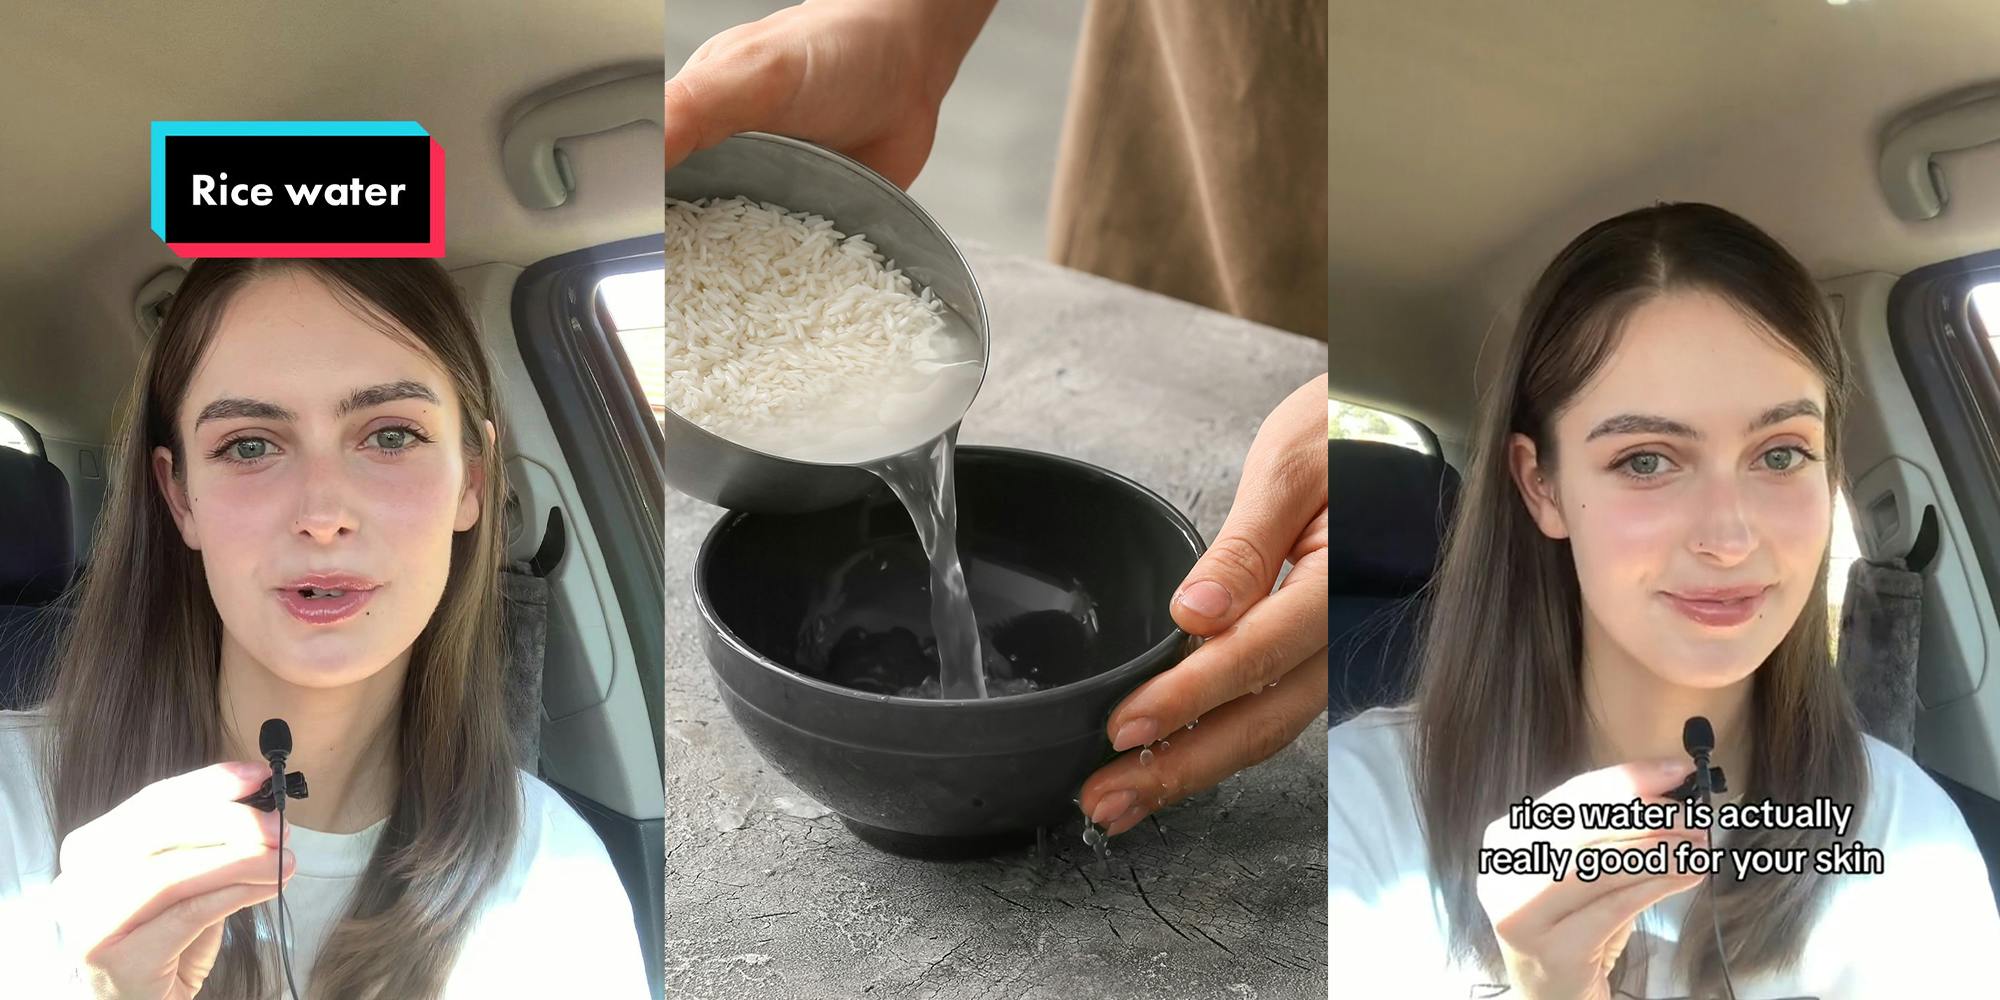 Fast food worker discovers rice water is amazing for her skin in PSA